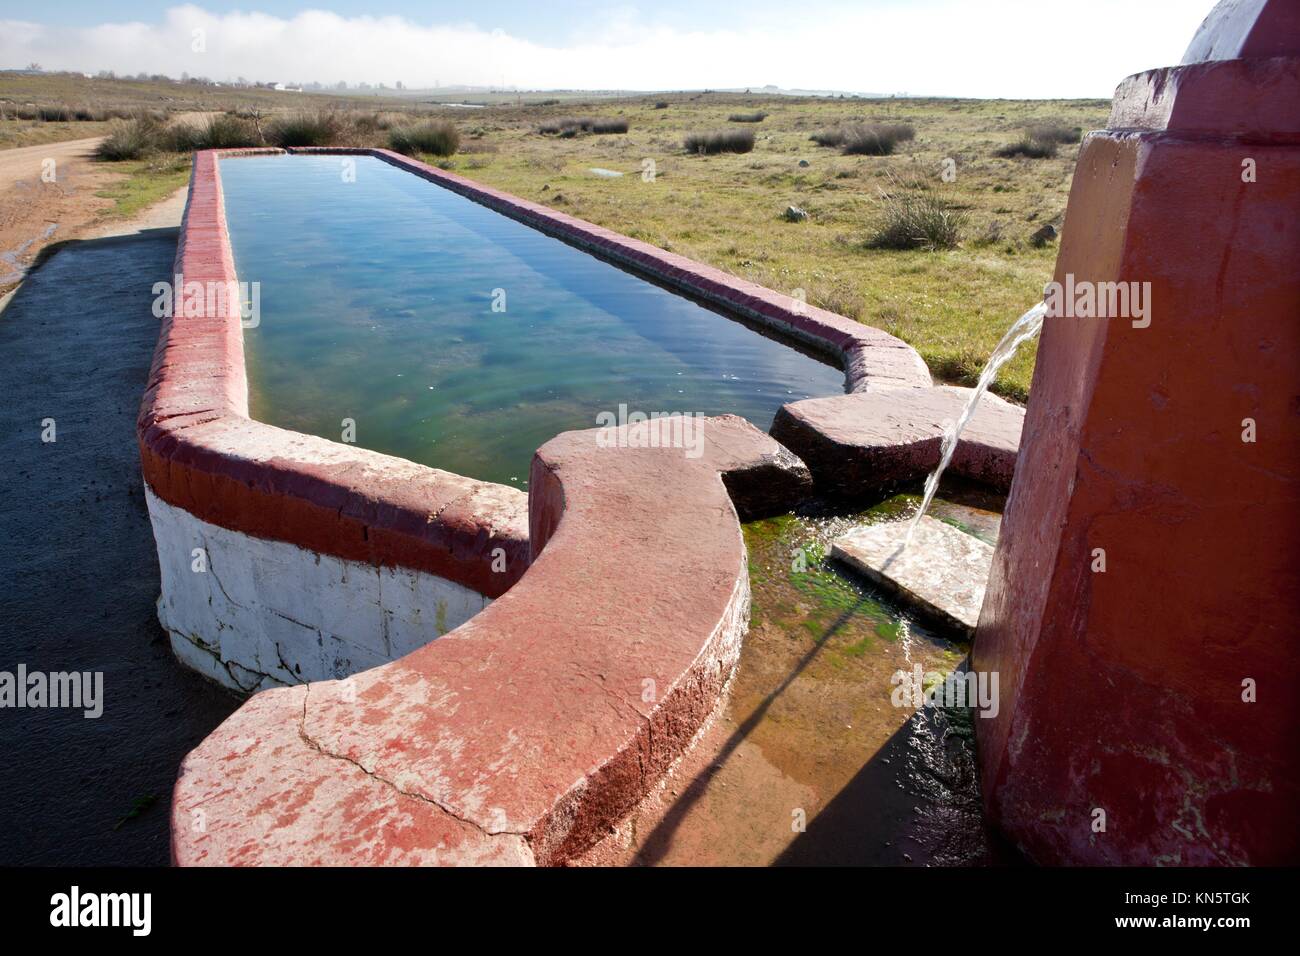 Rural fountain and basin with containers for agricultural livestock purposes, Spain. Stock Photo